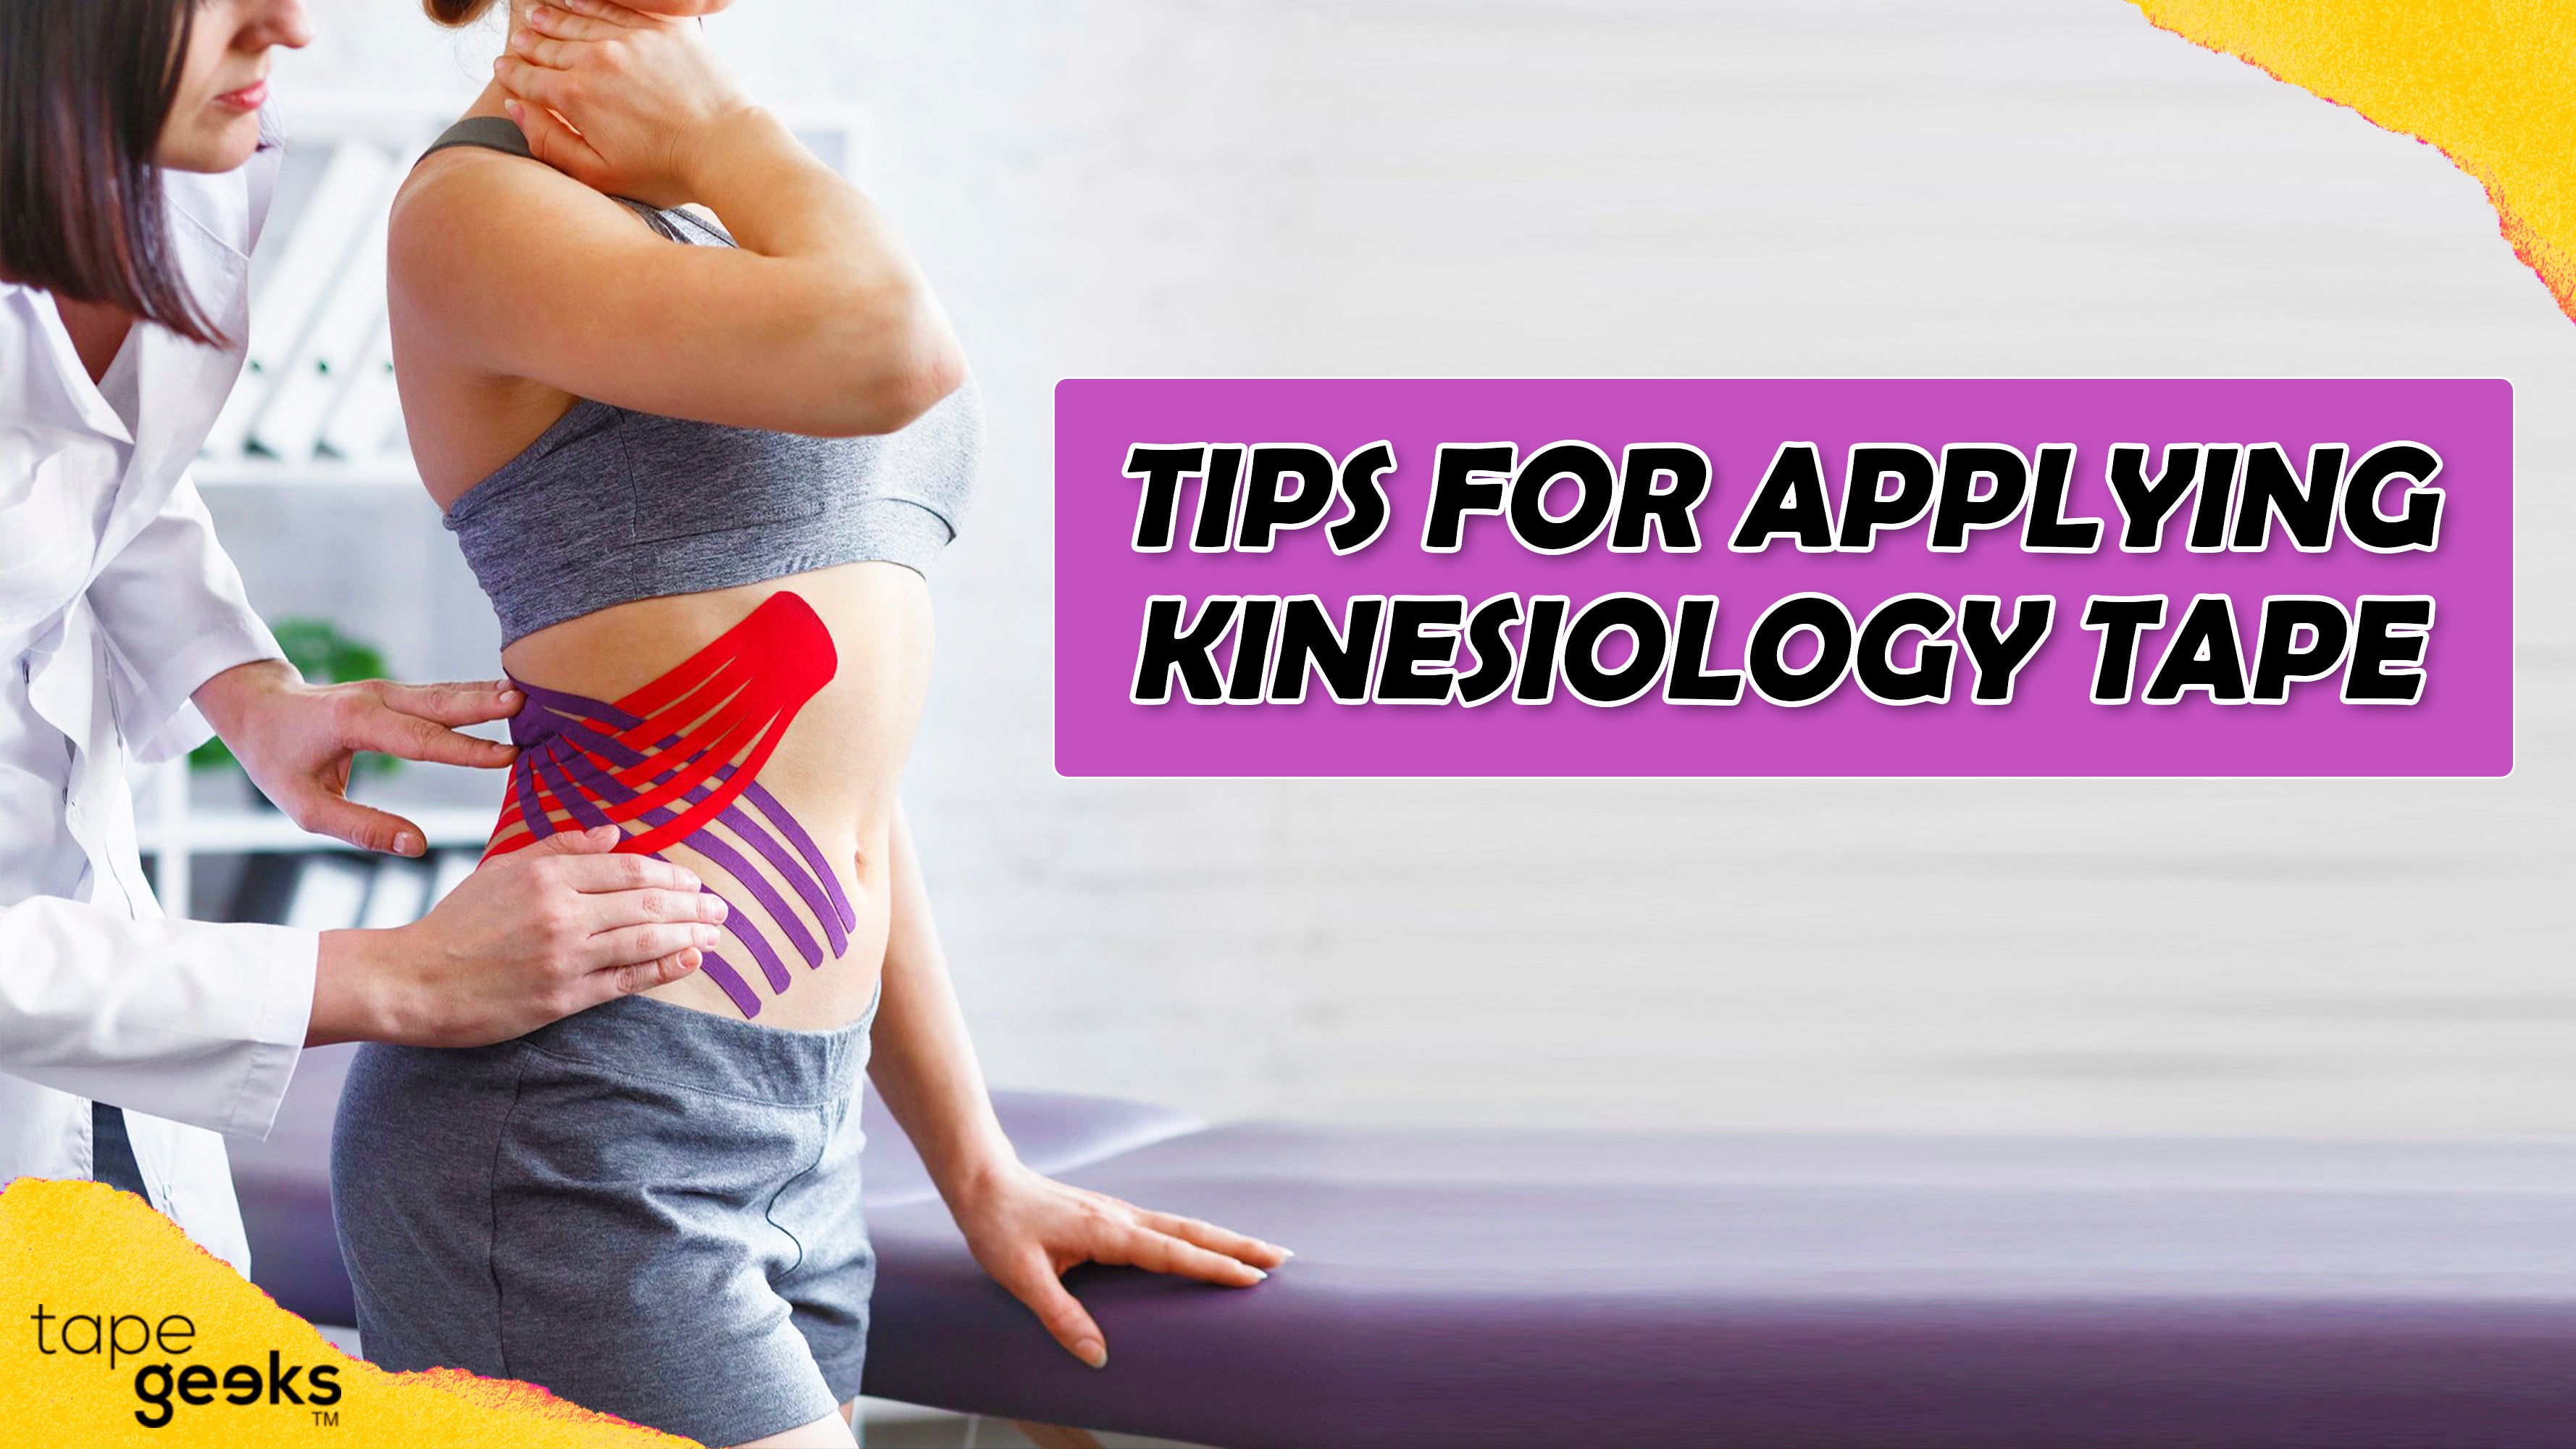 8 Tips for Applying Kinesiology Tape—Answers to FAQs